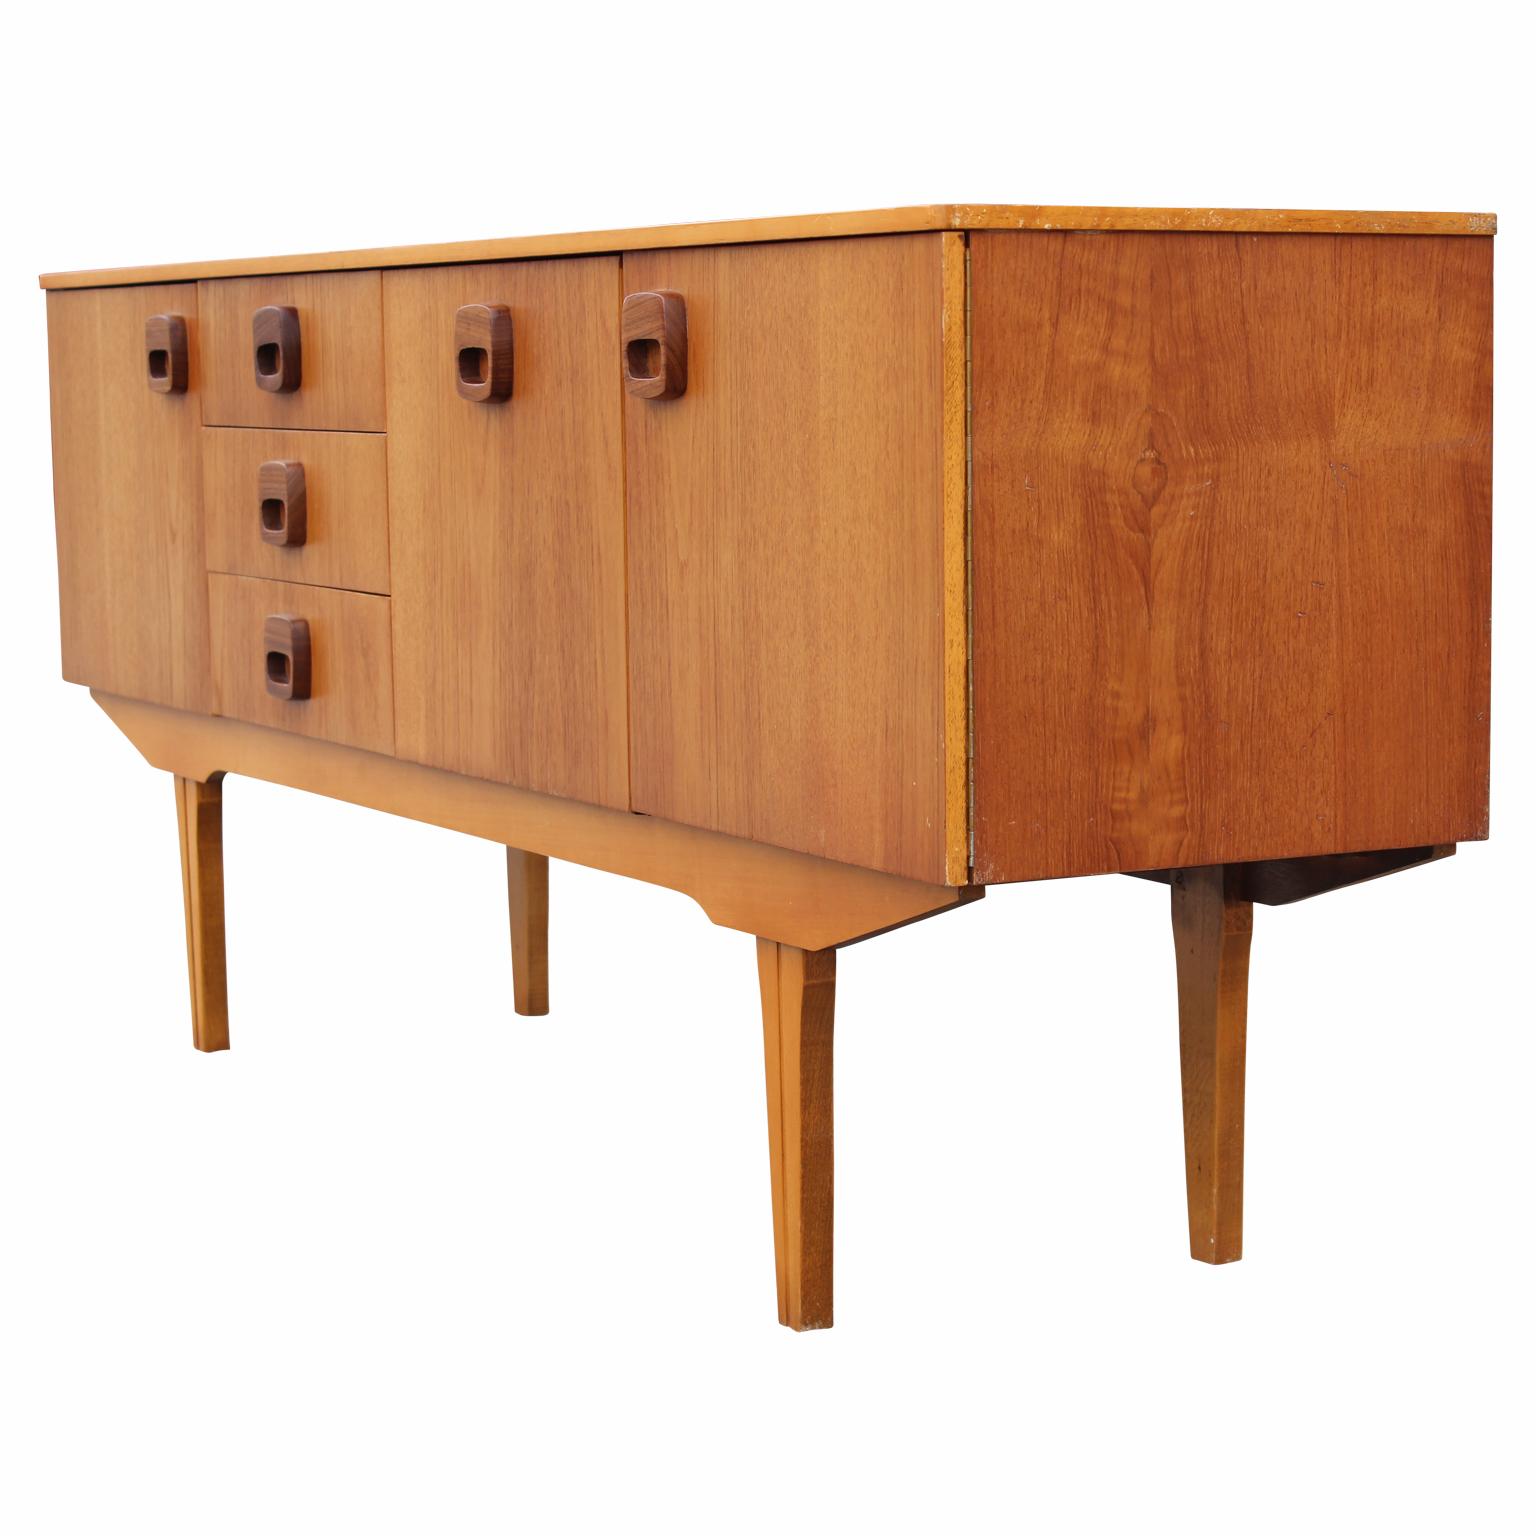 Mid-20th Century Mid-Century Modern Danish Style Teak Sideboard or Credenza with Wooden Handles